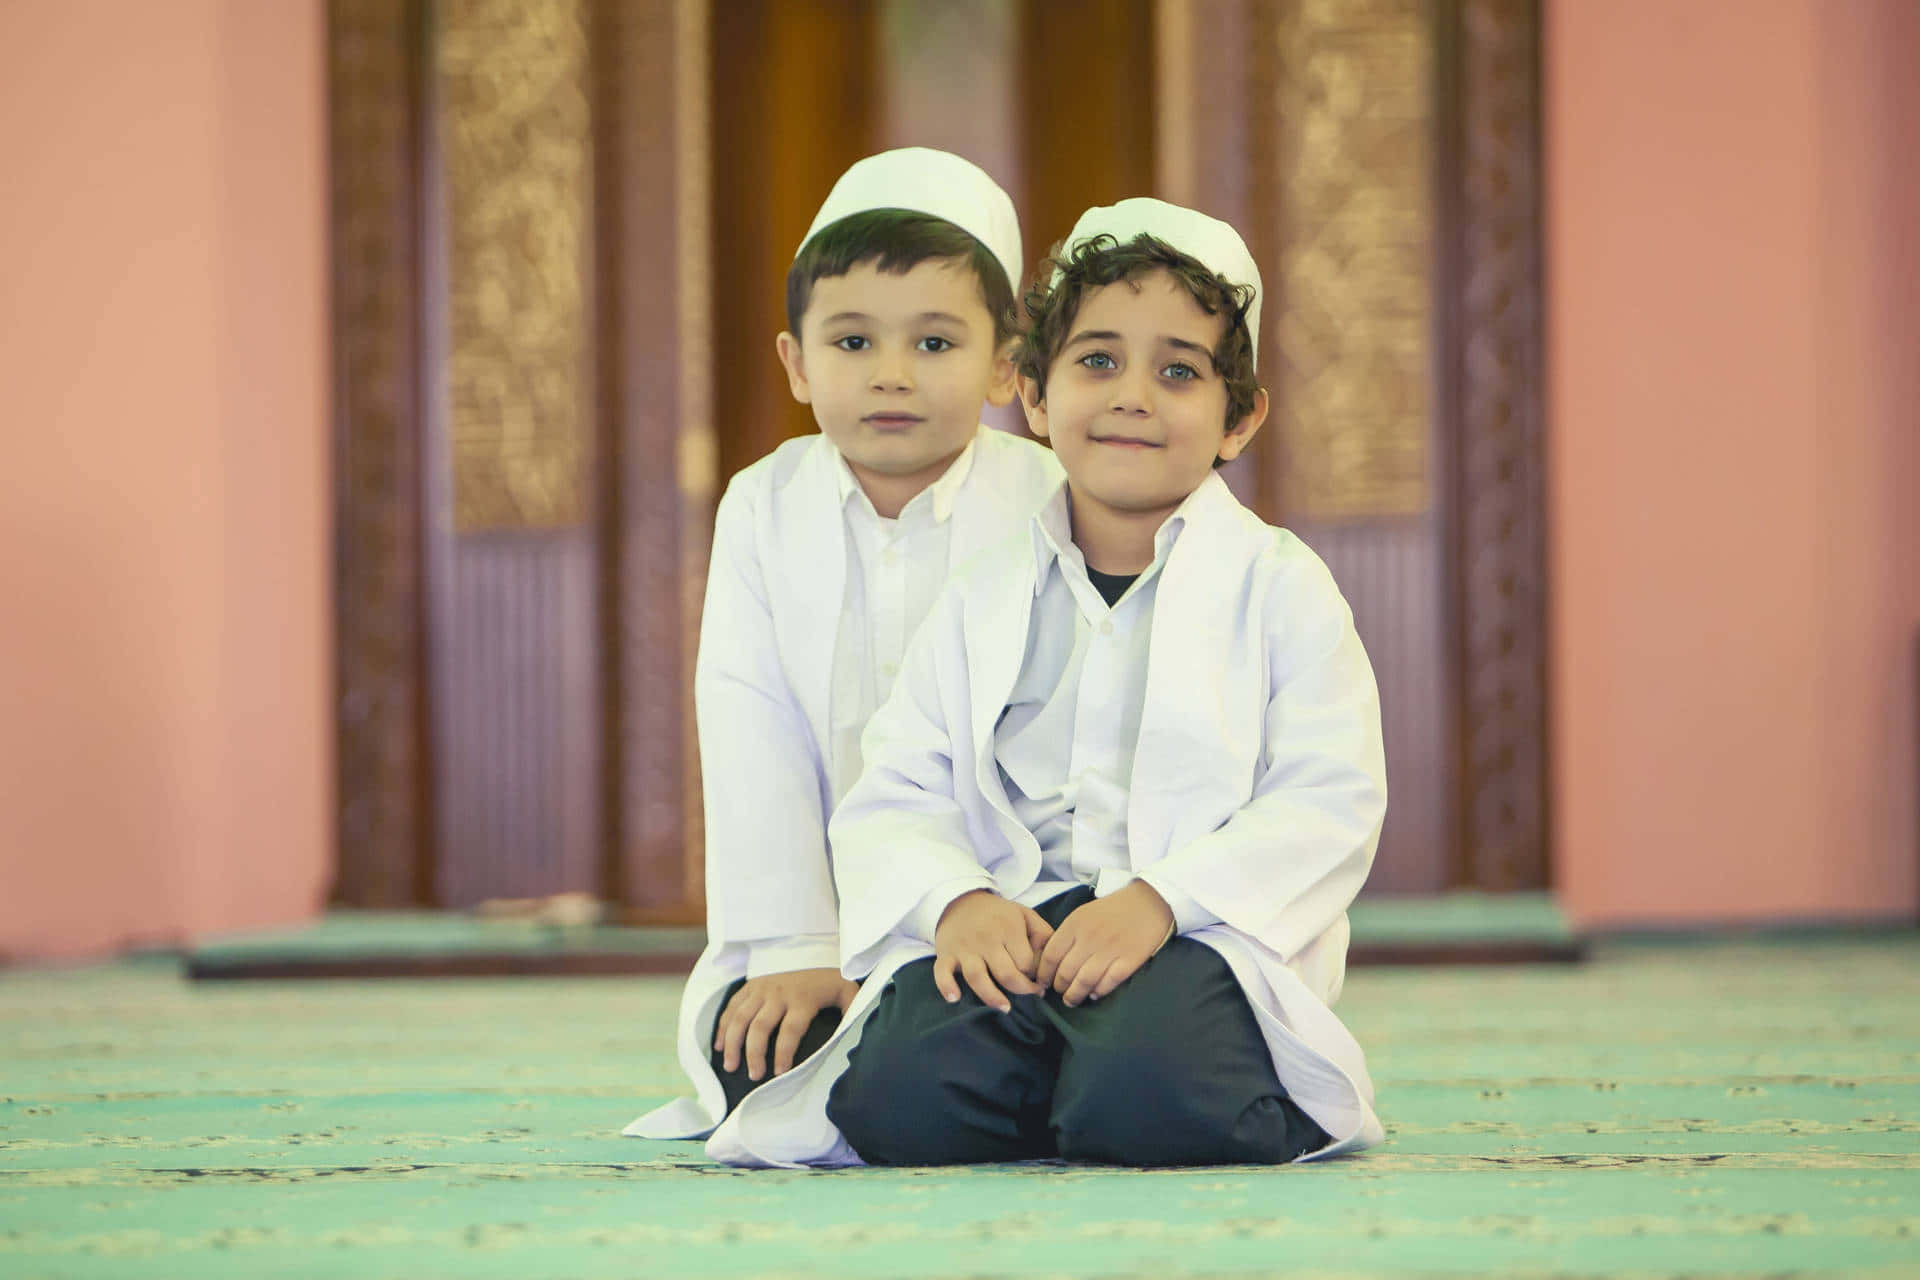 Two Young Muslim Boys Wallpaper